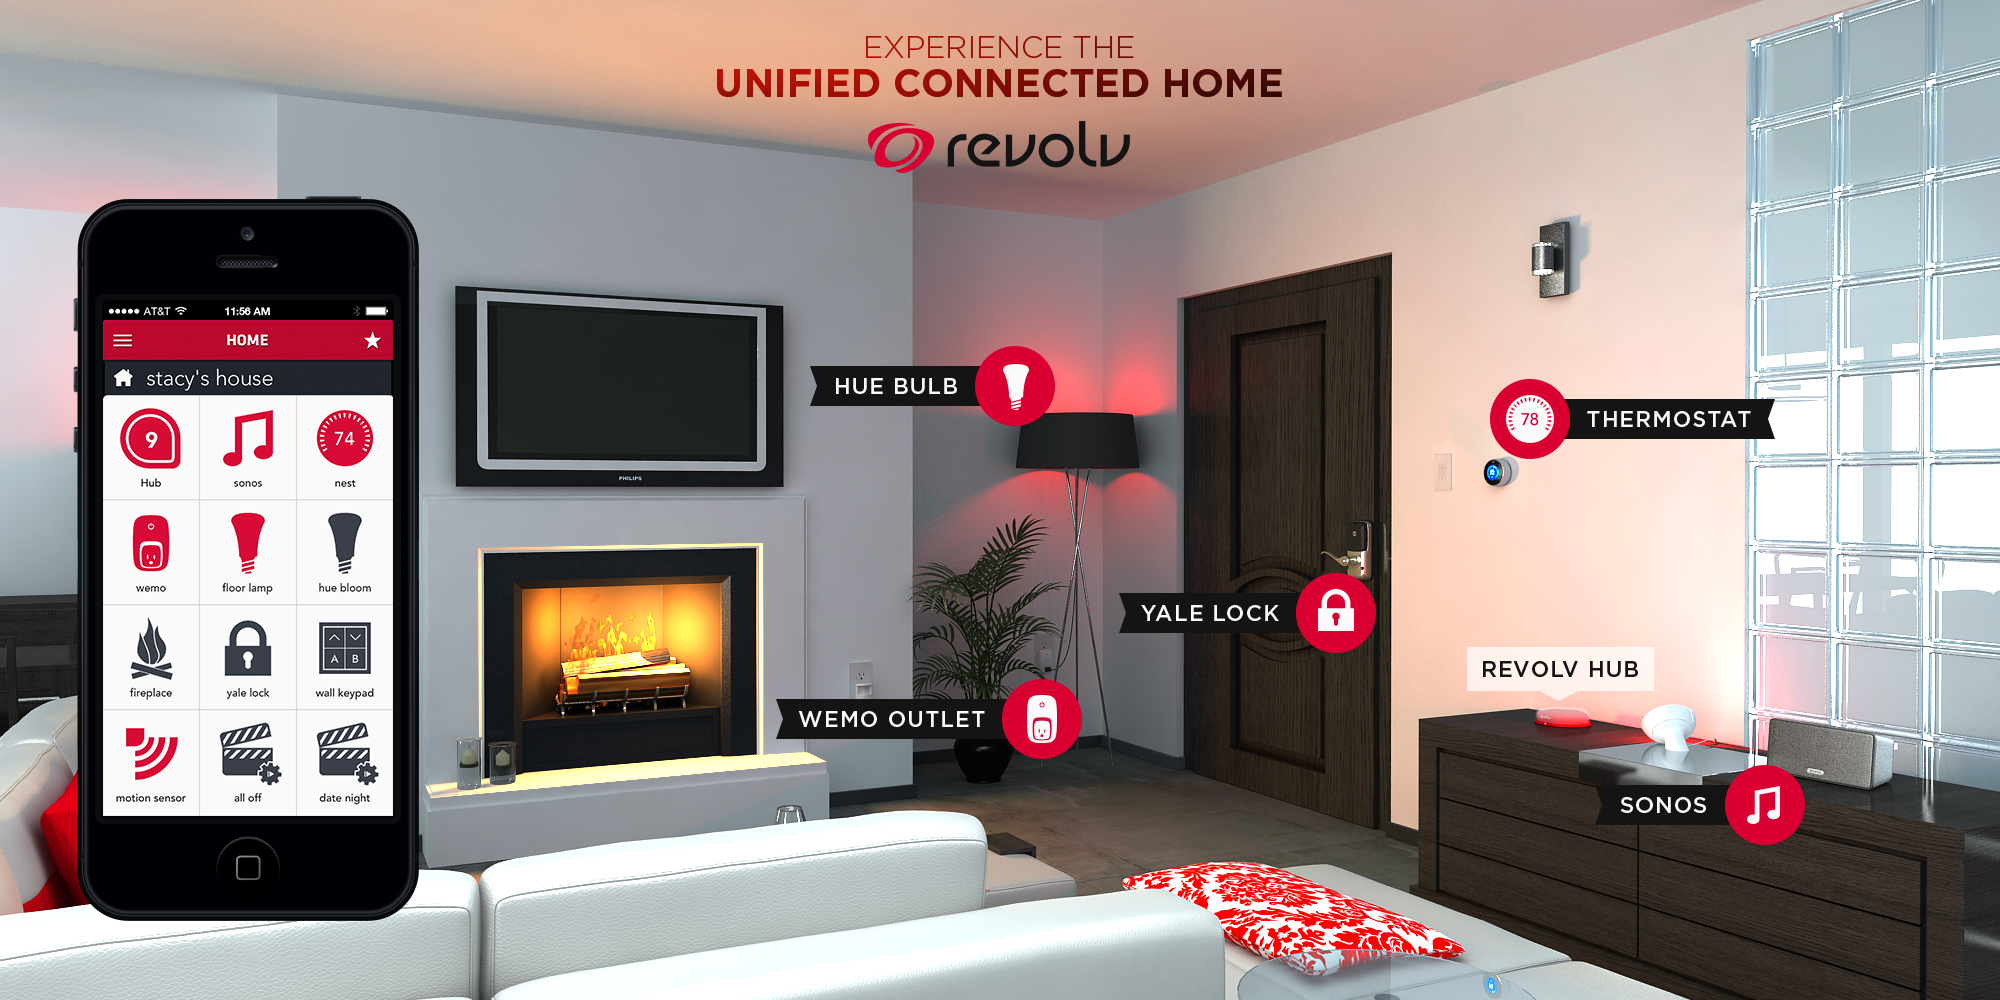 Revolv app gives the status of every smart device using Presence